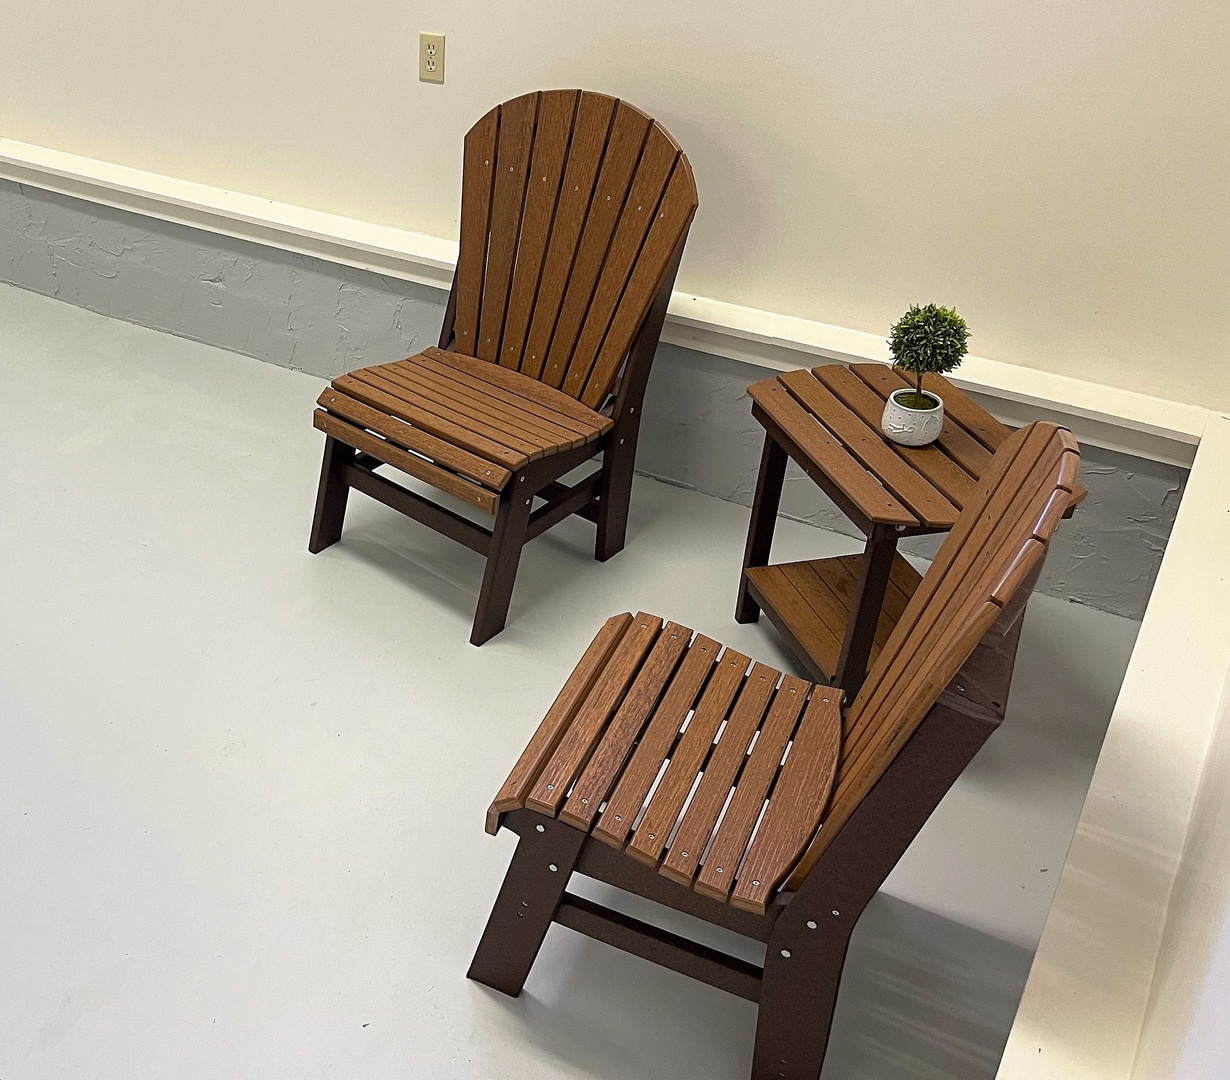 Adirondack chairs at 1 Crazy Cub, a 4 bedroom cabin rental located in Pigeon Forge.